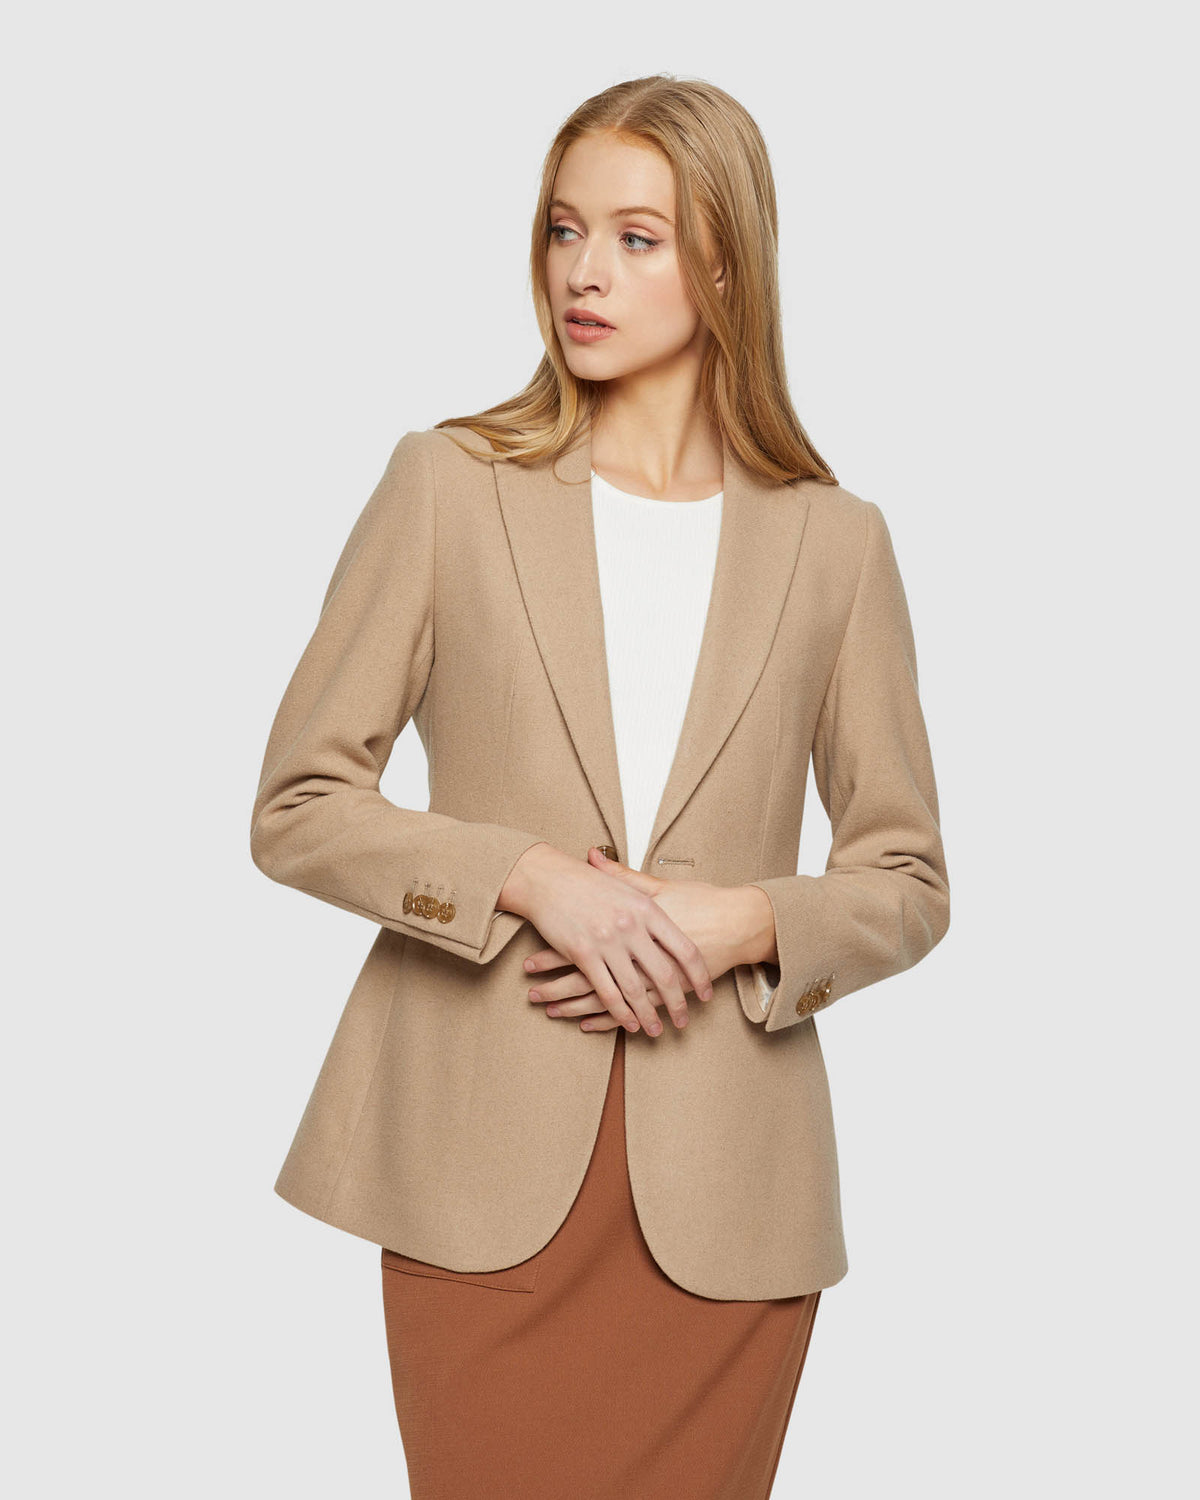 Reiss Iria Double Breasted Wool Blend Suit Blazer | REISS USA